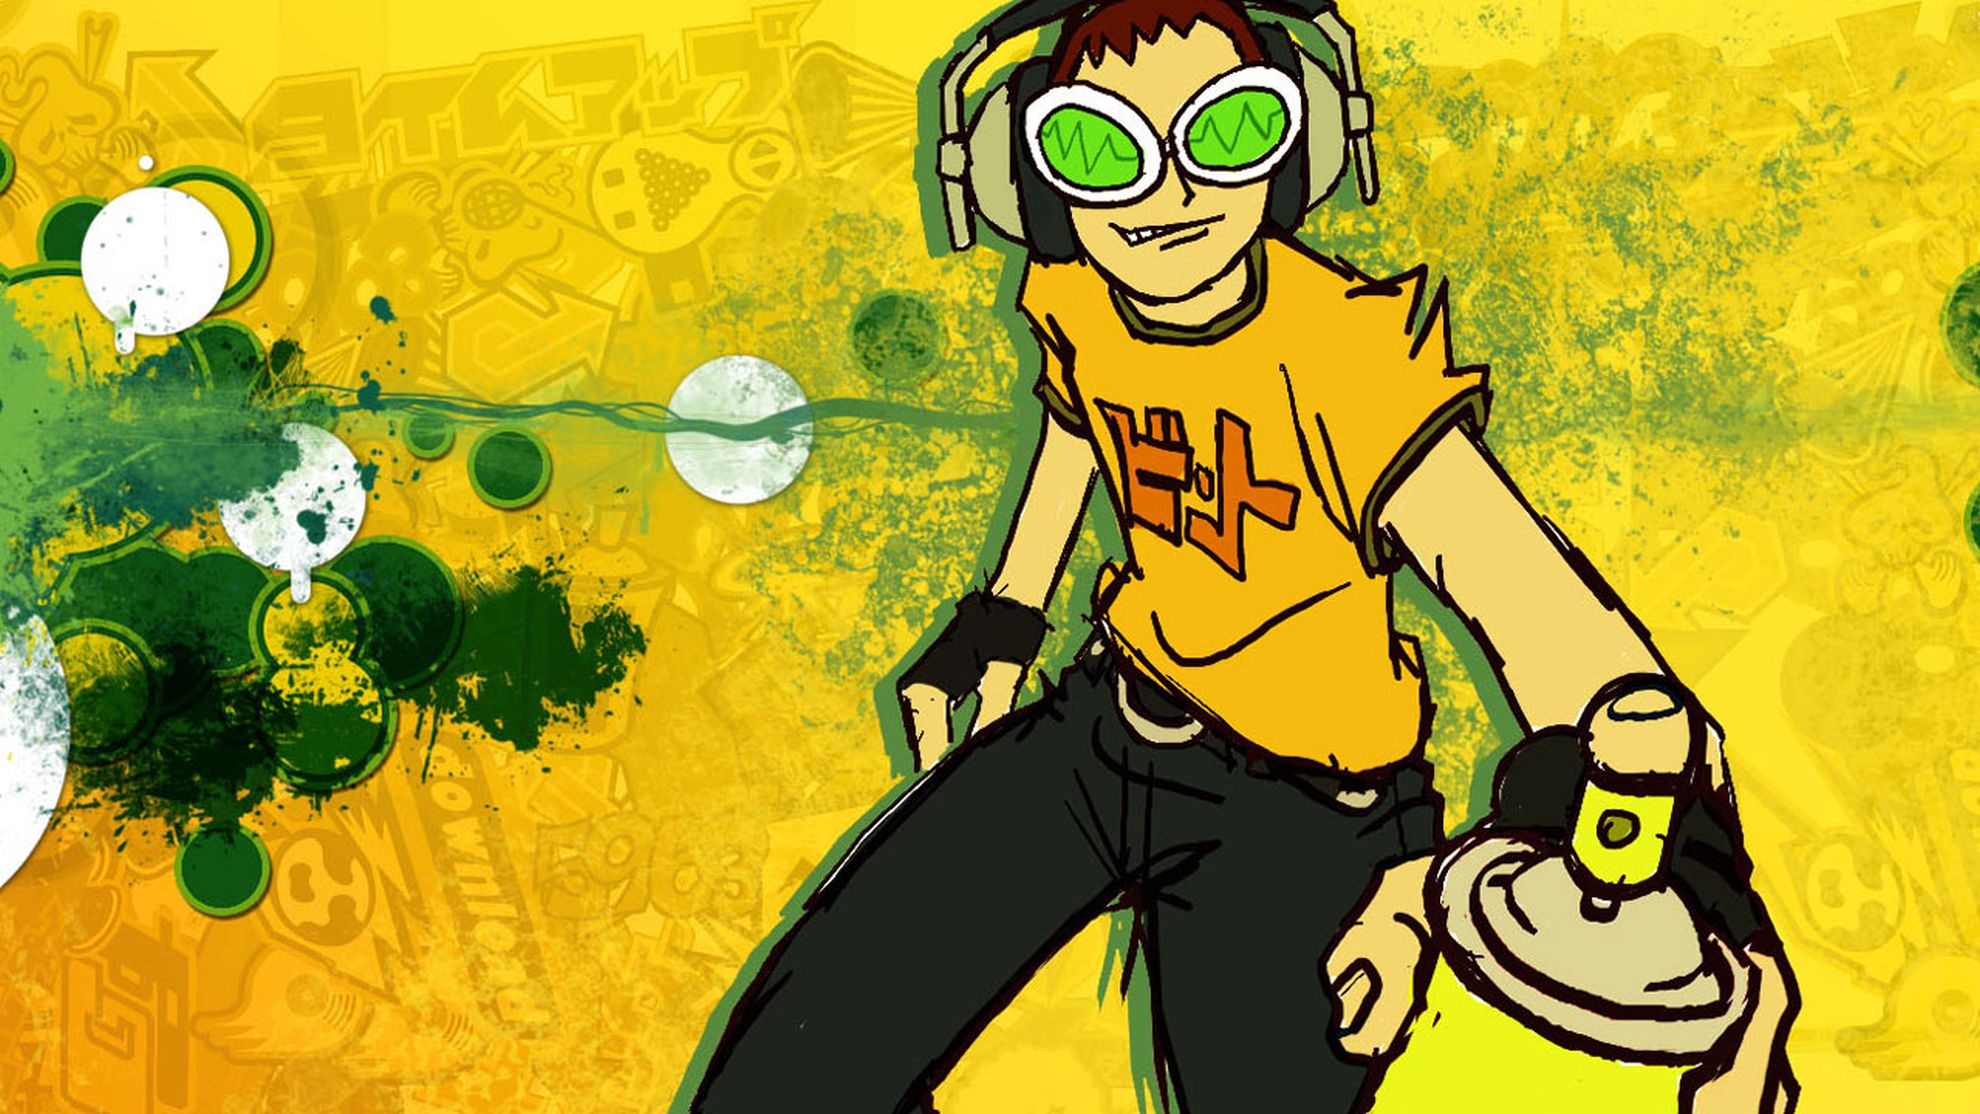 Image for SEGA said to be working on reboots of Crazy Taxi and Jet Set Radio as part of its Super Games initiative